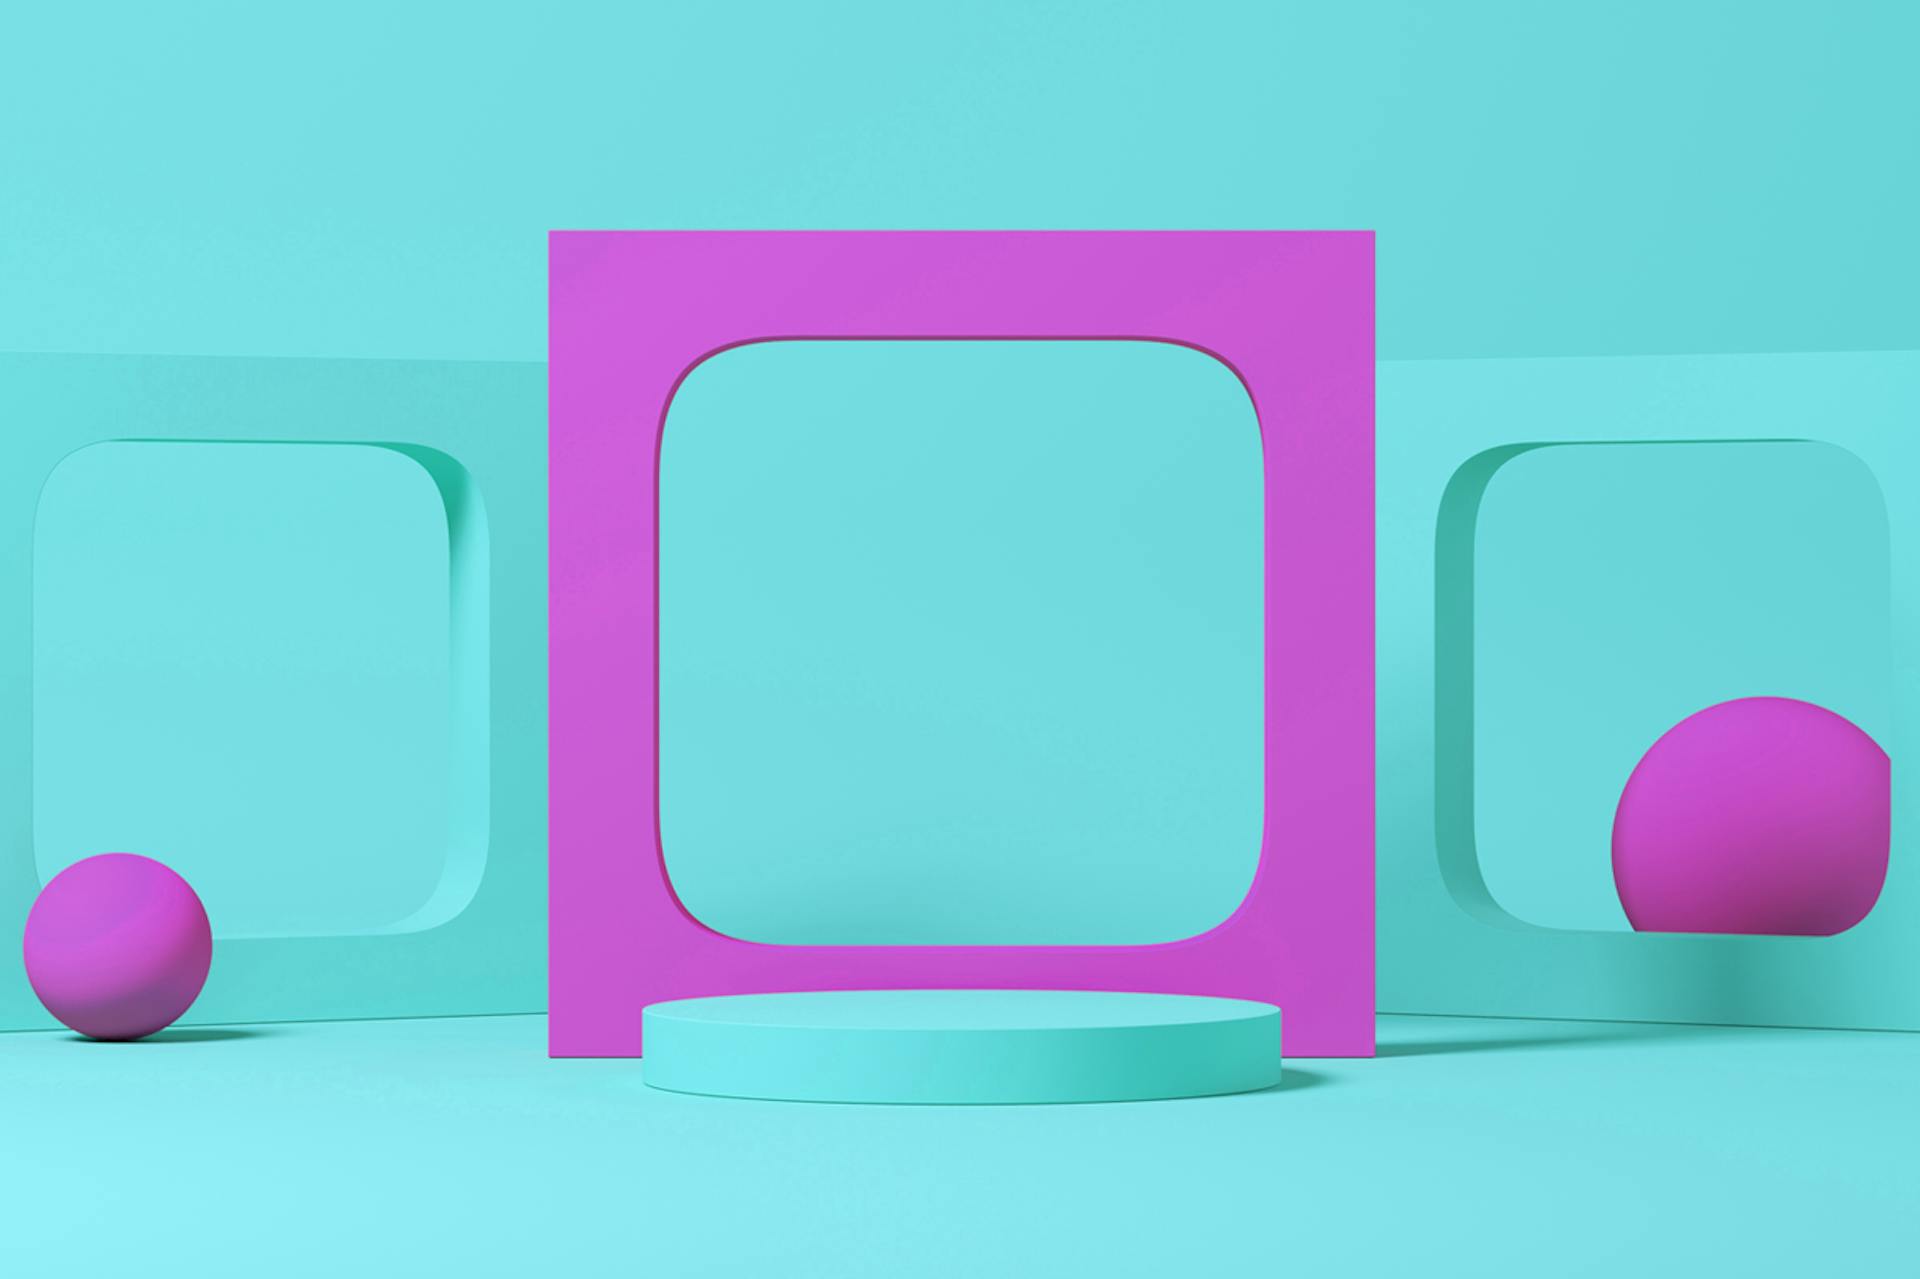 An abstract scenario with a teal podium in the center. The podium has three squares behind it. The image is being used as the Best Social Media Management Tools